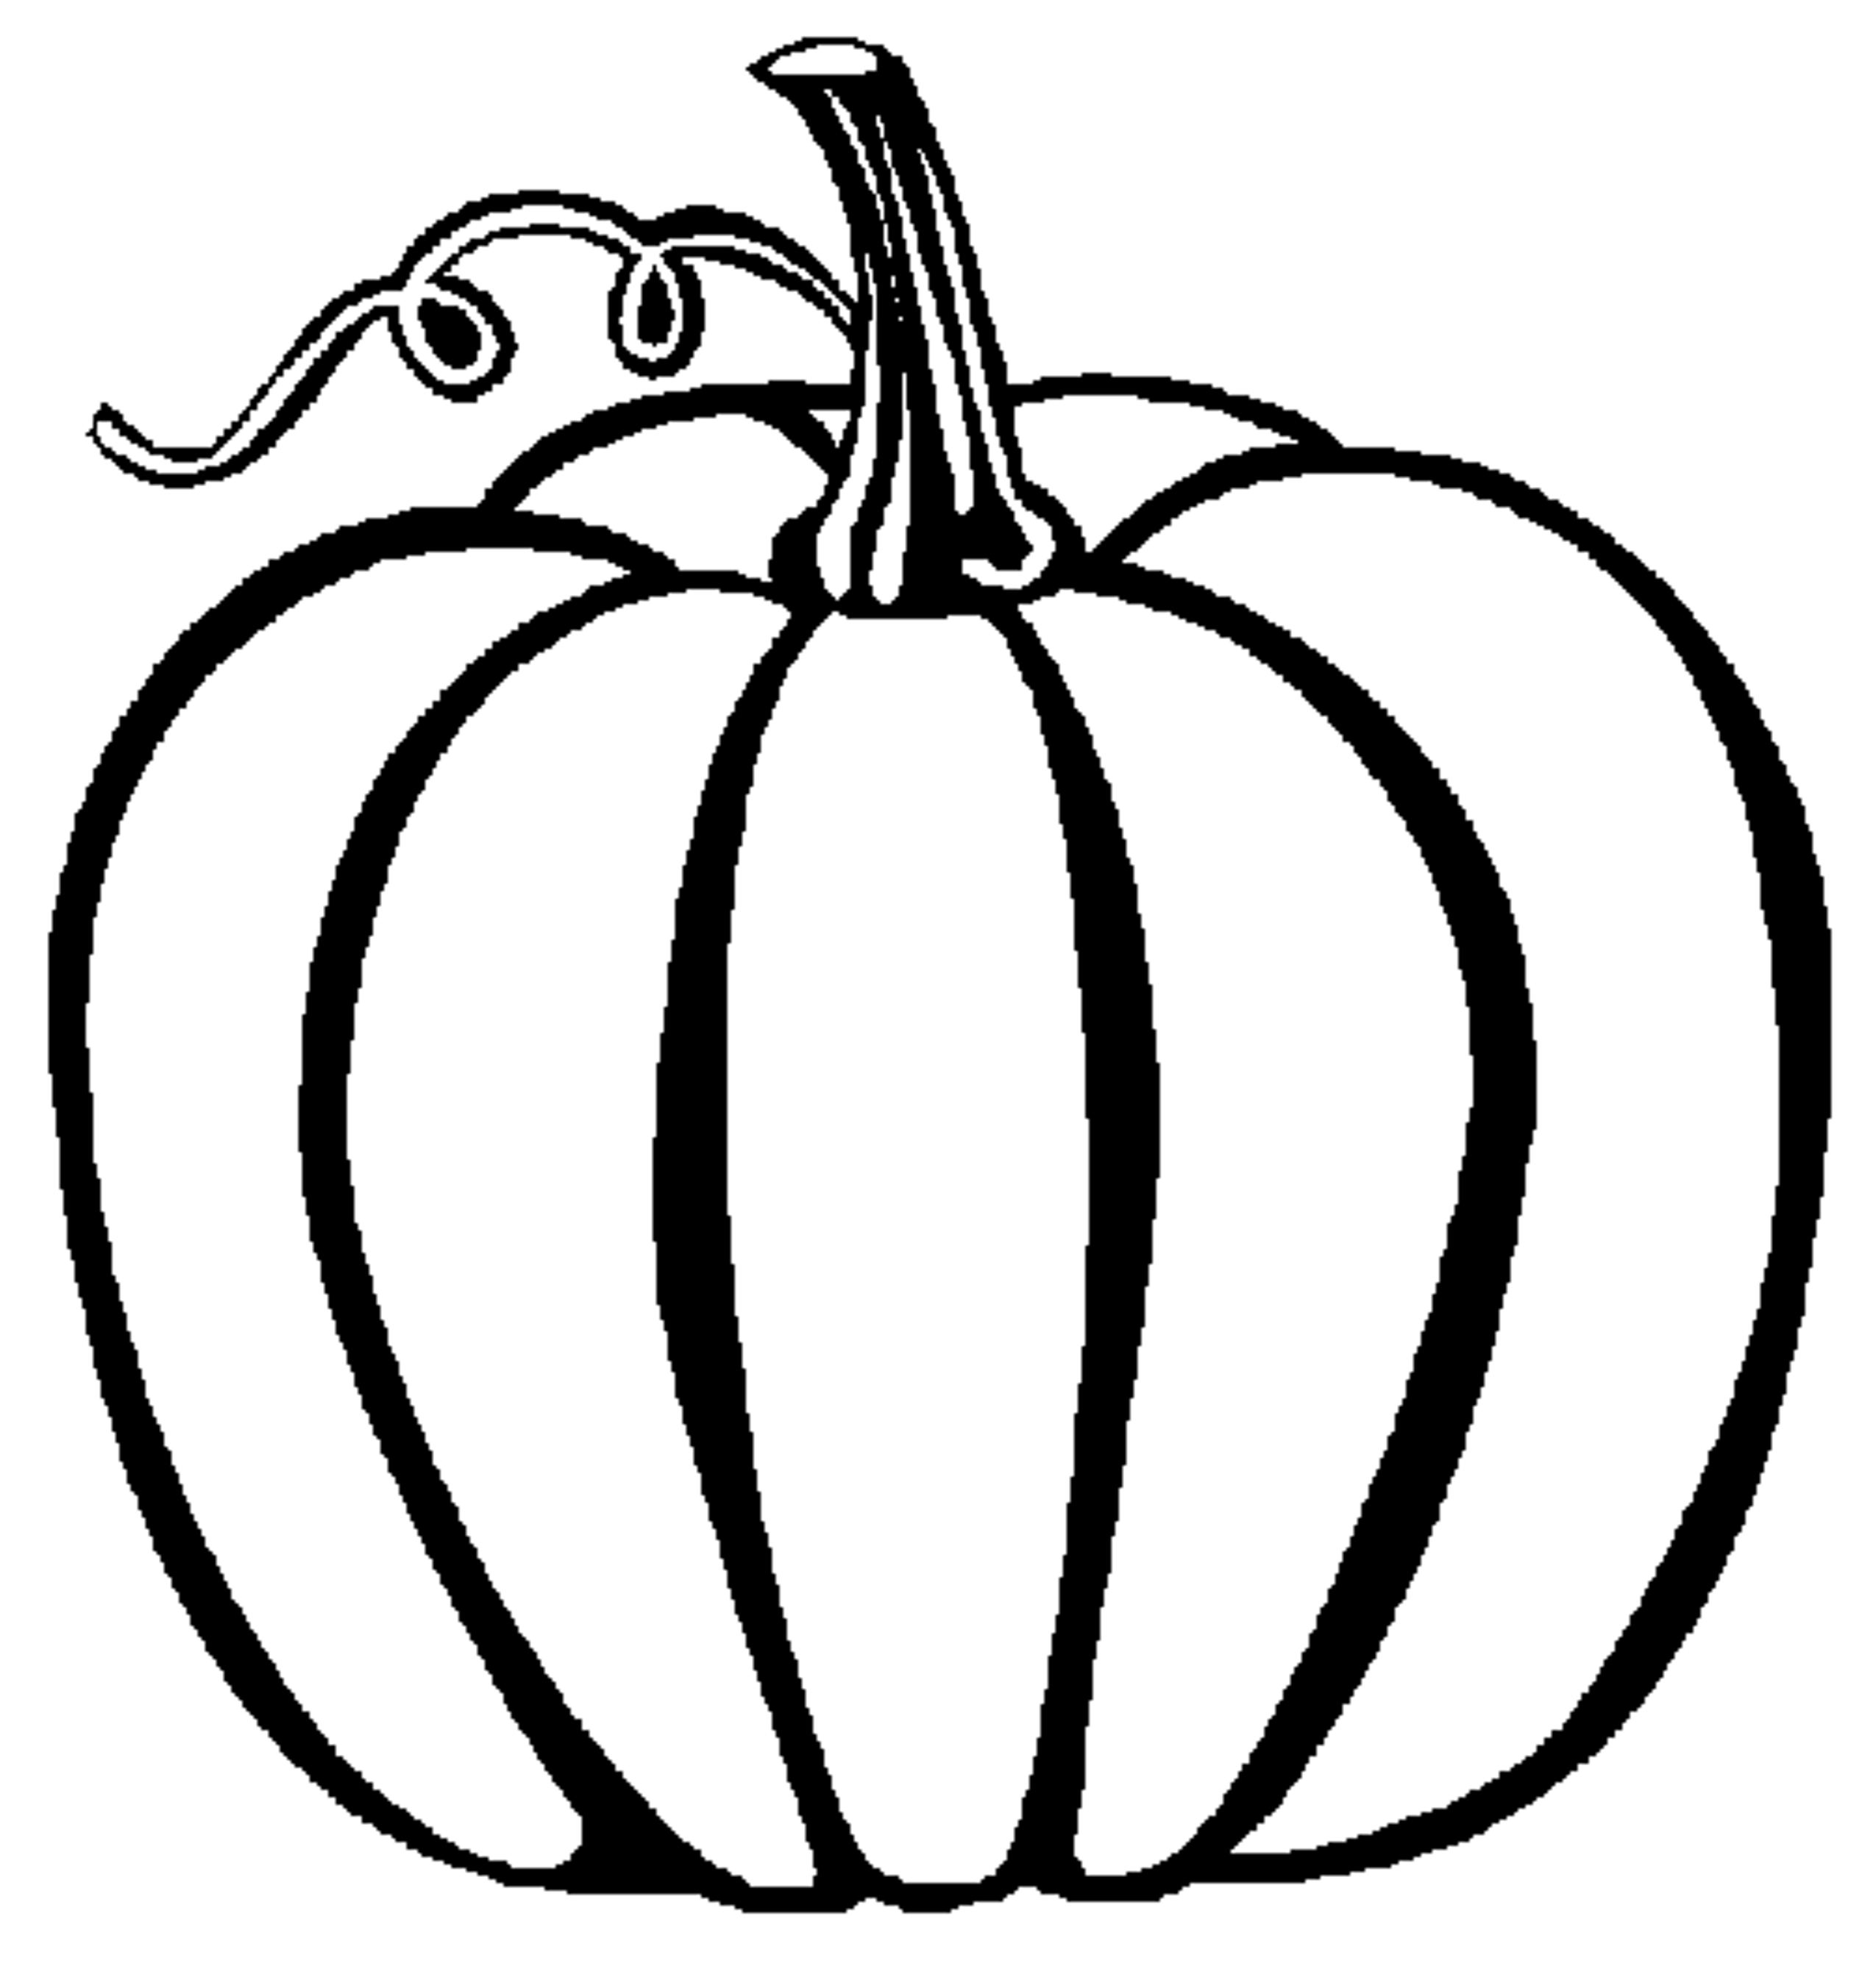 Coloring page: Pumpkin (Objects) #166824 - Free Printable Coloring Pages